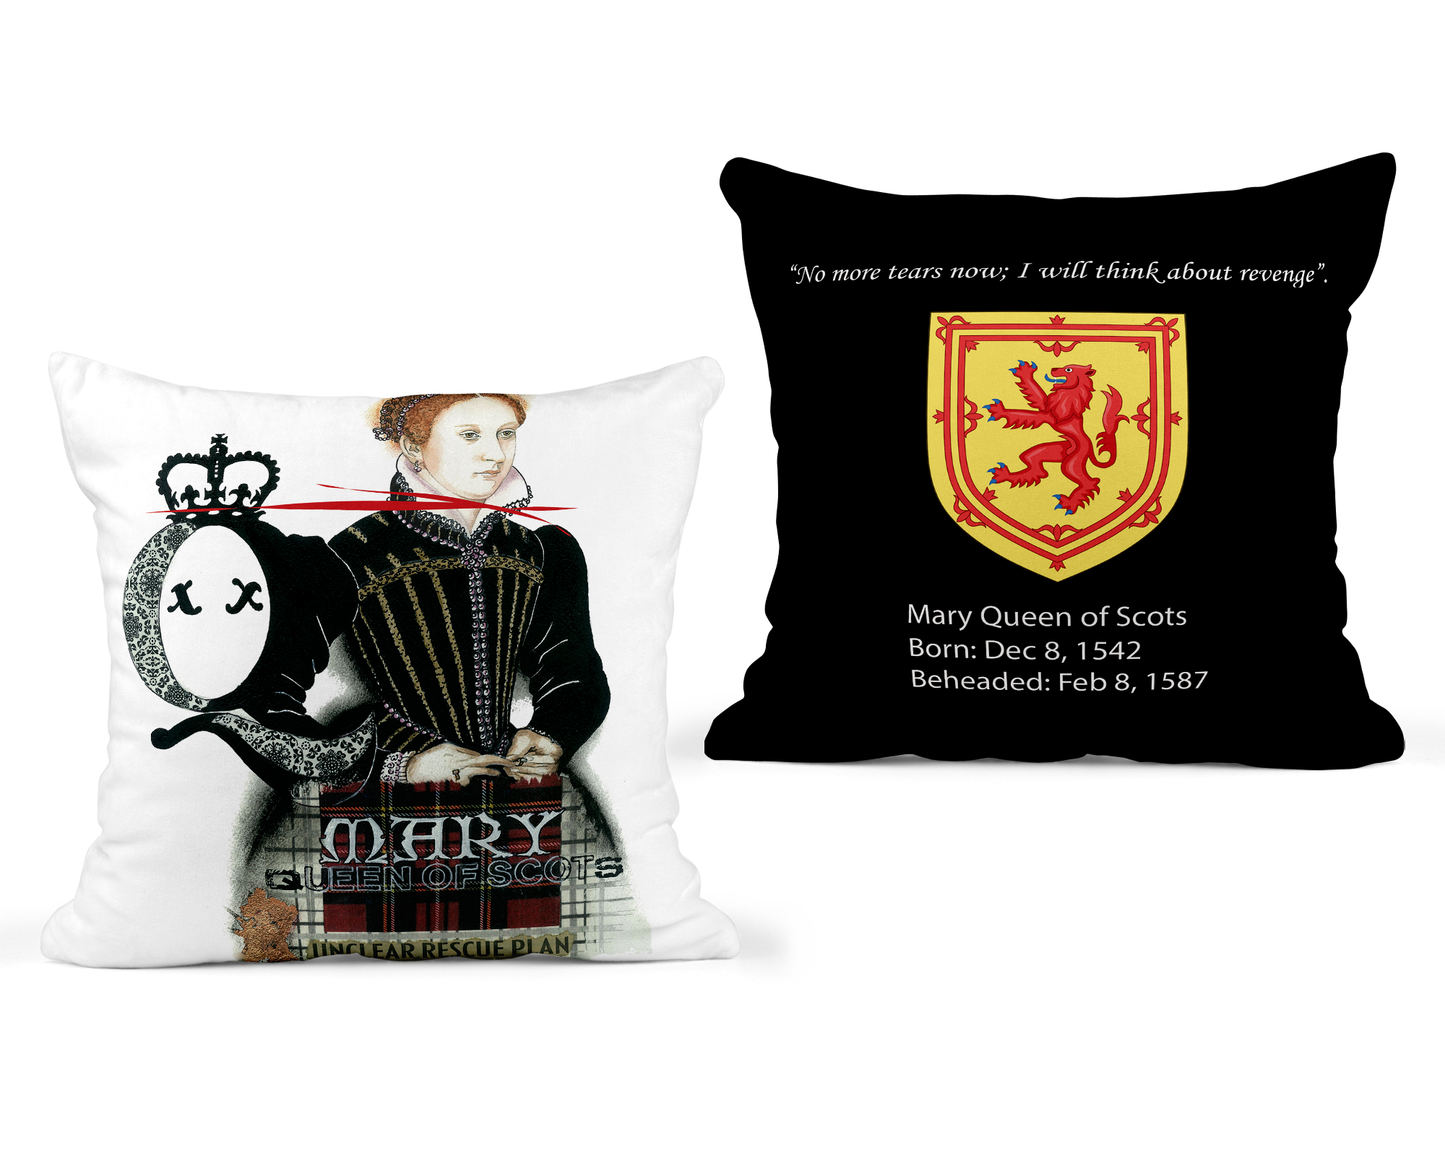 Mary Queen of Scots Pillow - Black Back - 18x18